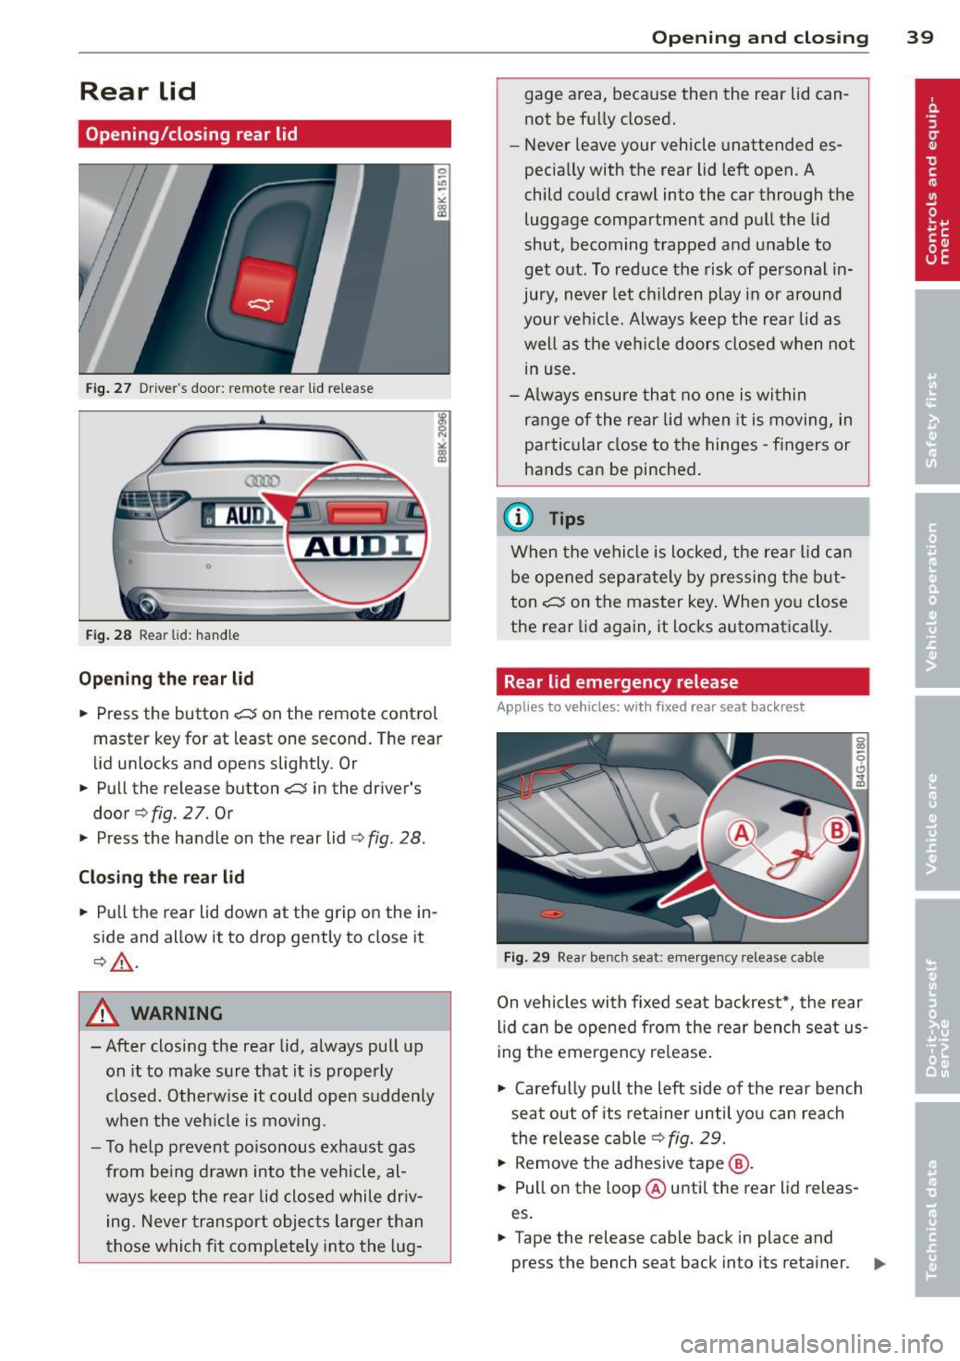 AUDI A4 SEDAN 2013 Service Manual Rear  lid 
Opening/closing  rear  lid 
Fig. 27 Drive r"s  door:  re m ote  rear  lid  rele ase 
Fig. 28 Rear  lid:  handle 
Opening  the rear  lid 
.,. Press  the  button .c::5 on  the  remote  contro